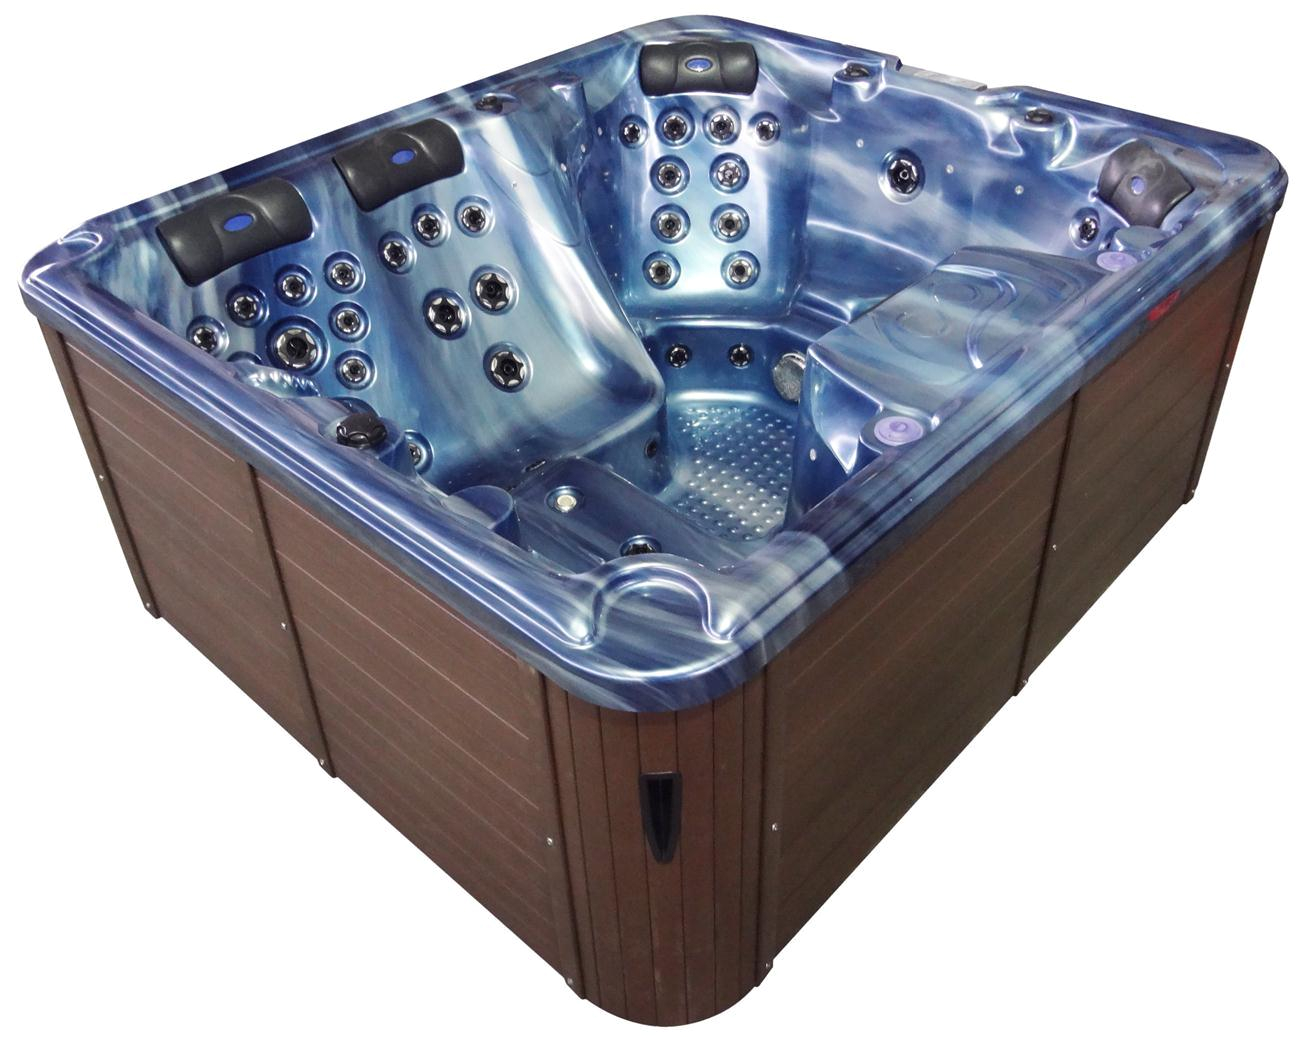 China Hot Sale Massage Outdoor SPA Balboa System Hot Tub Jacuzzi Function Low Price